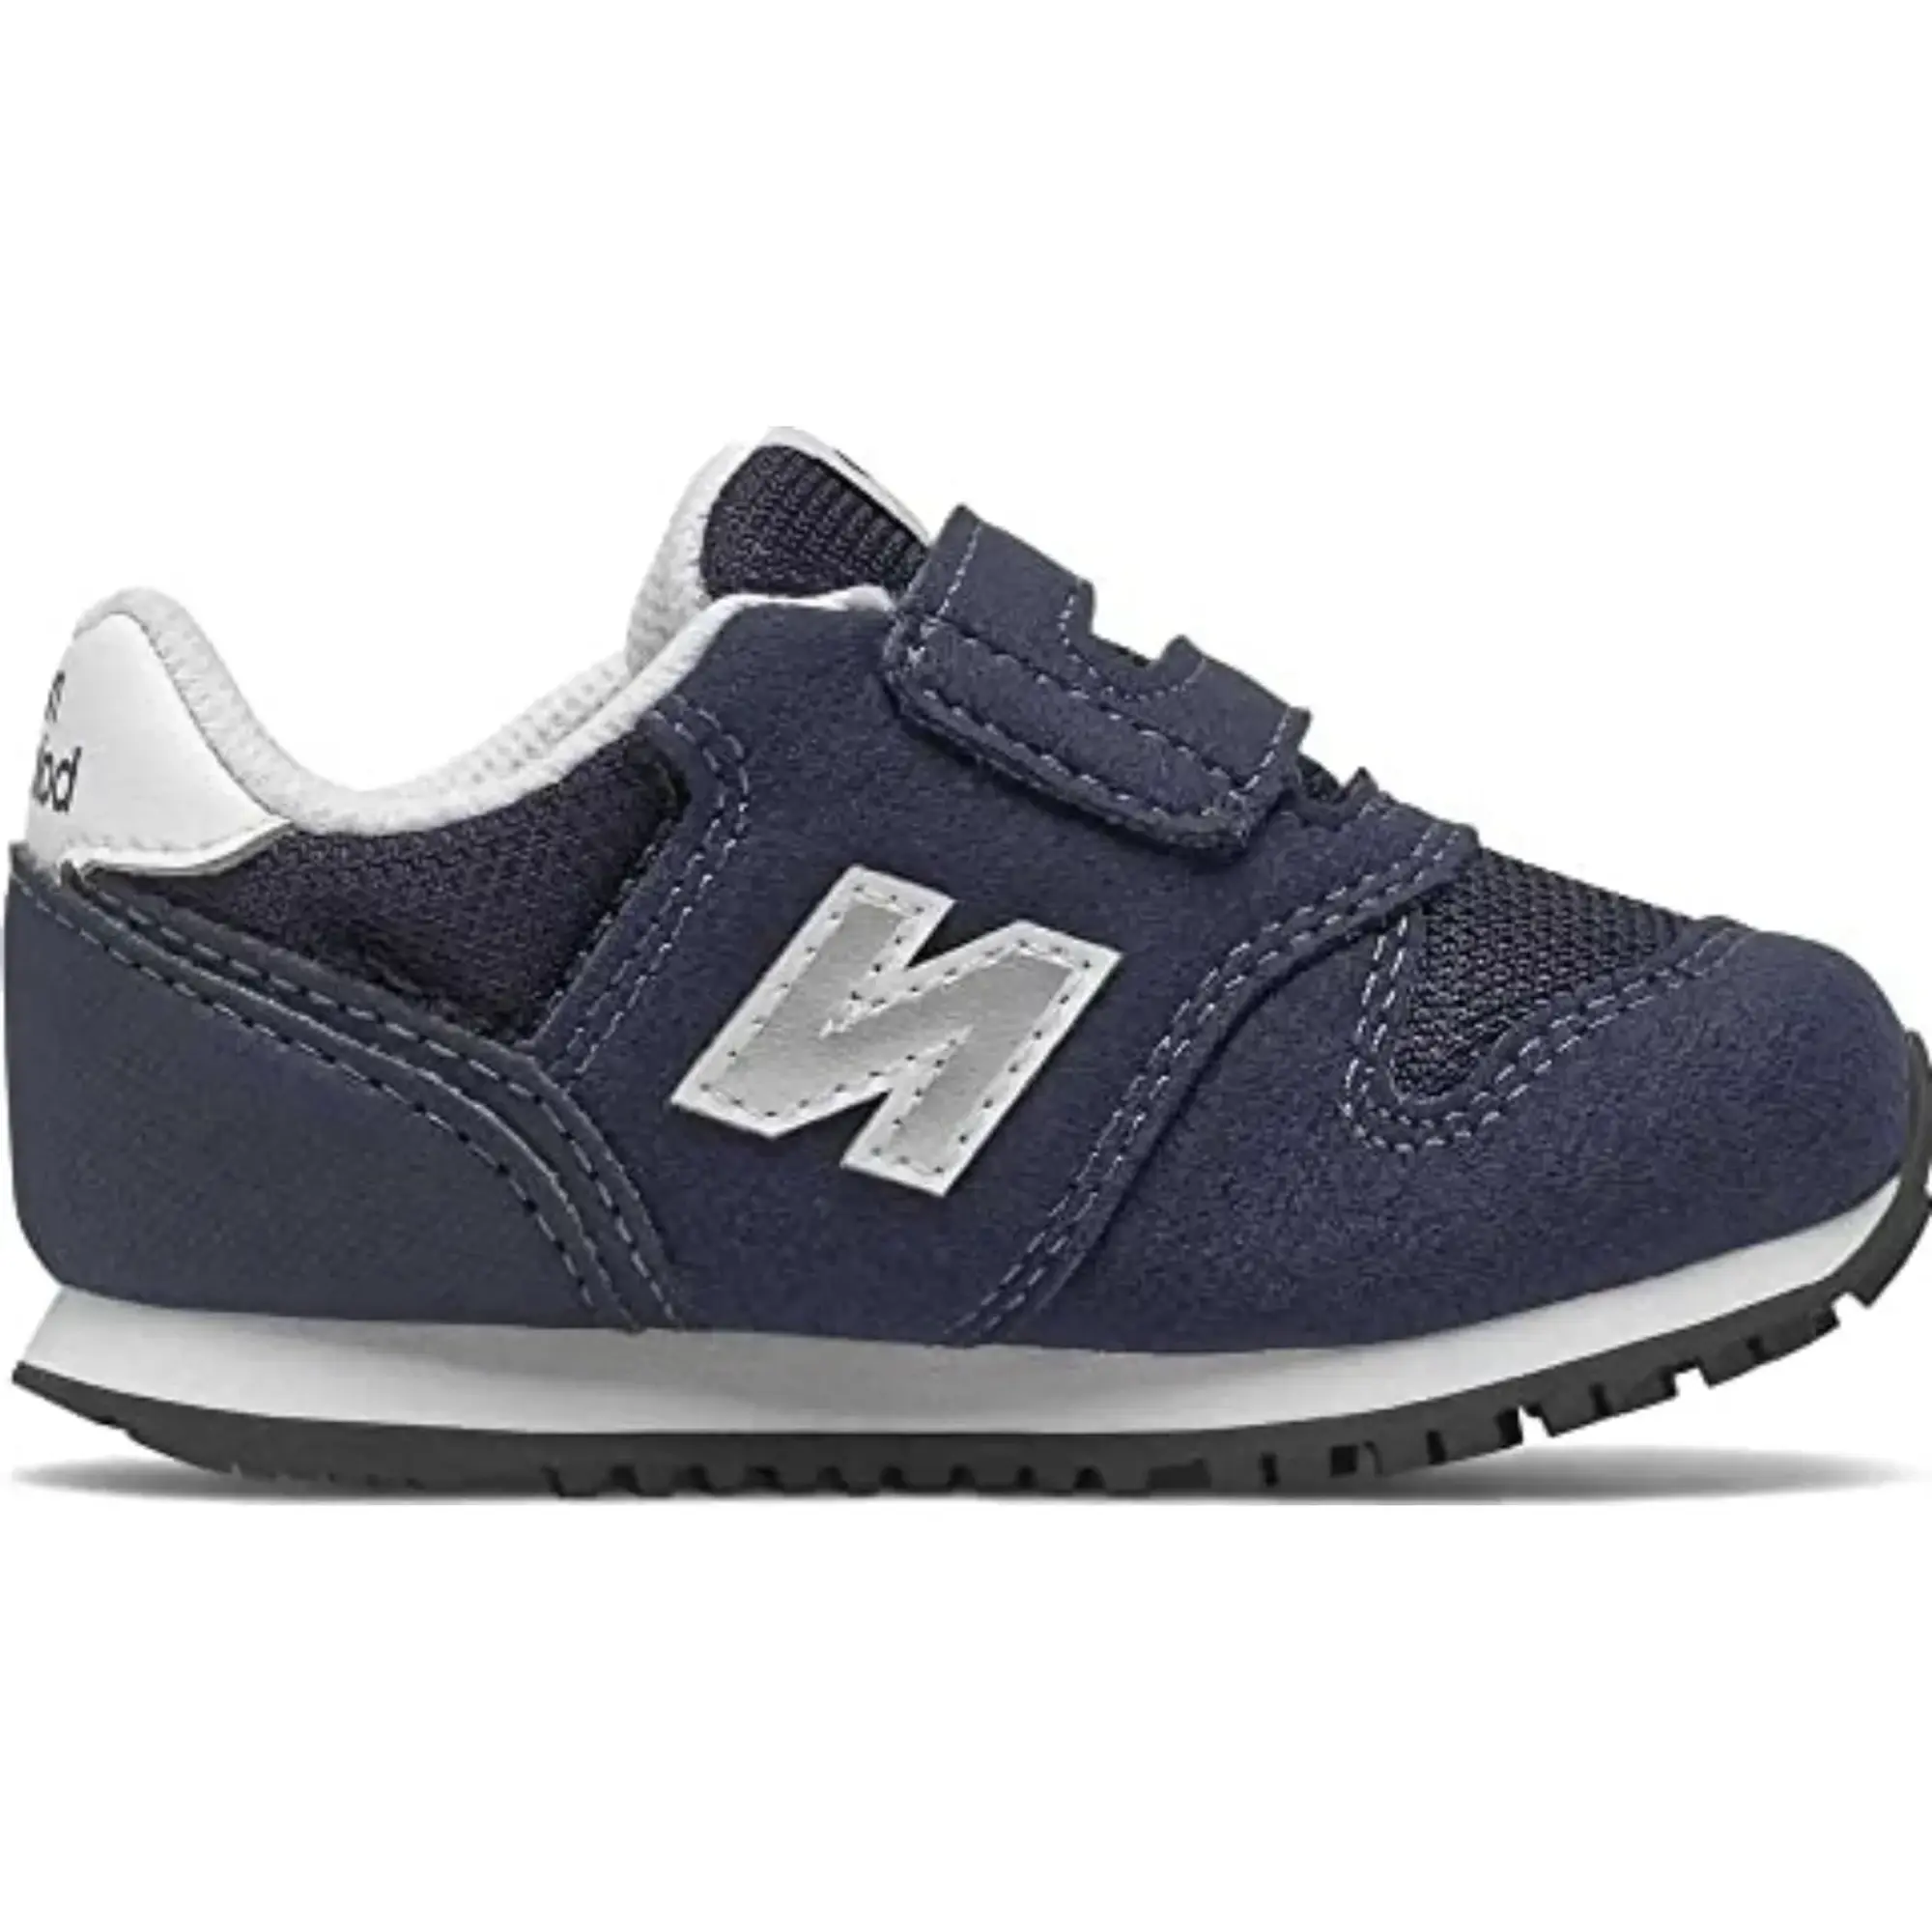 New Balance Infants' 373 in Blue/White Synthetic